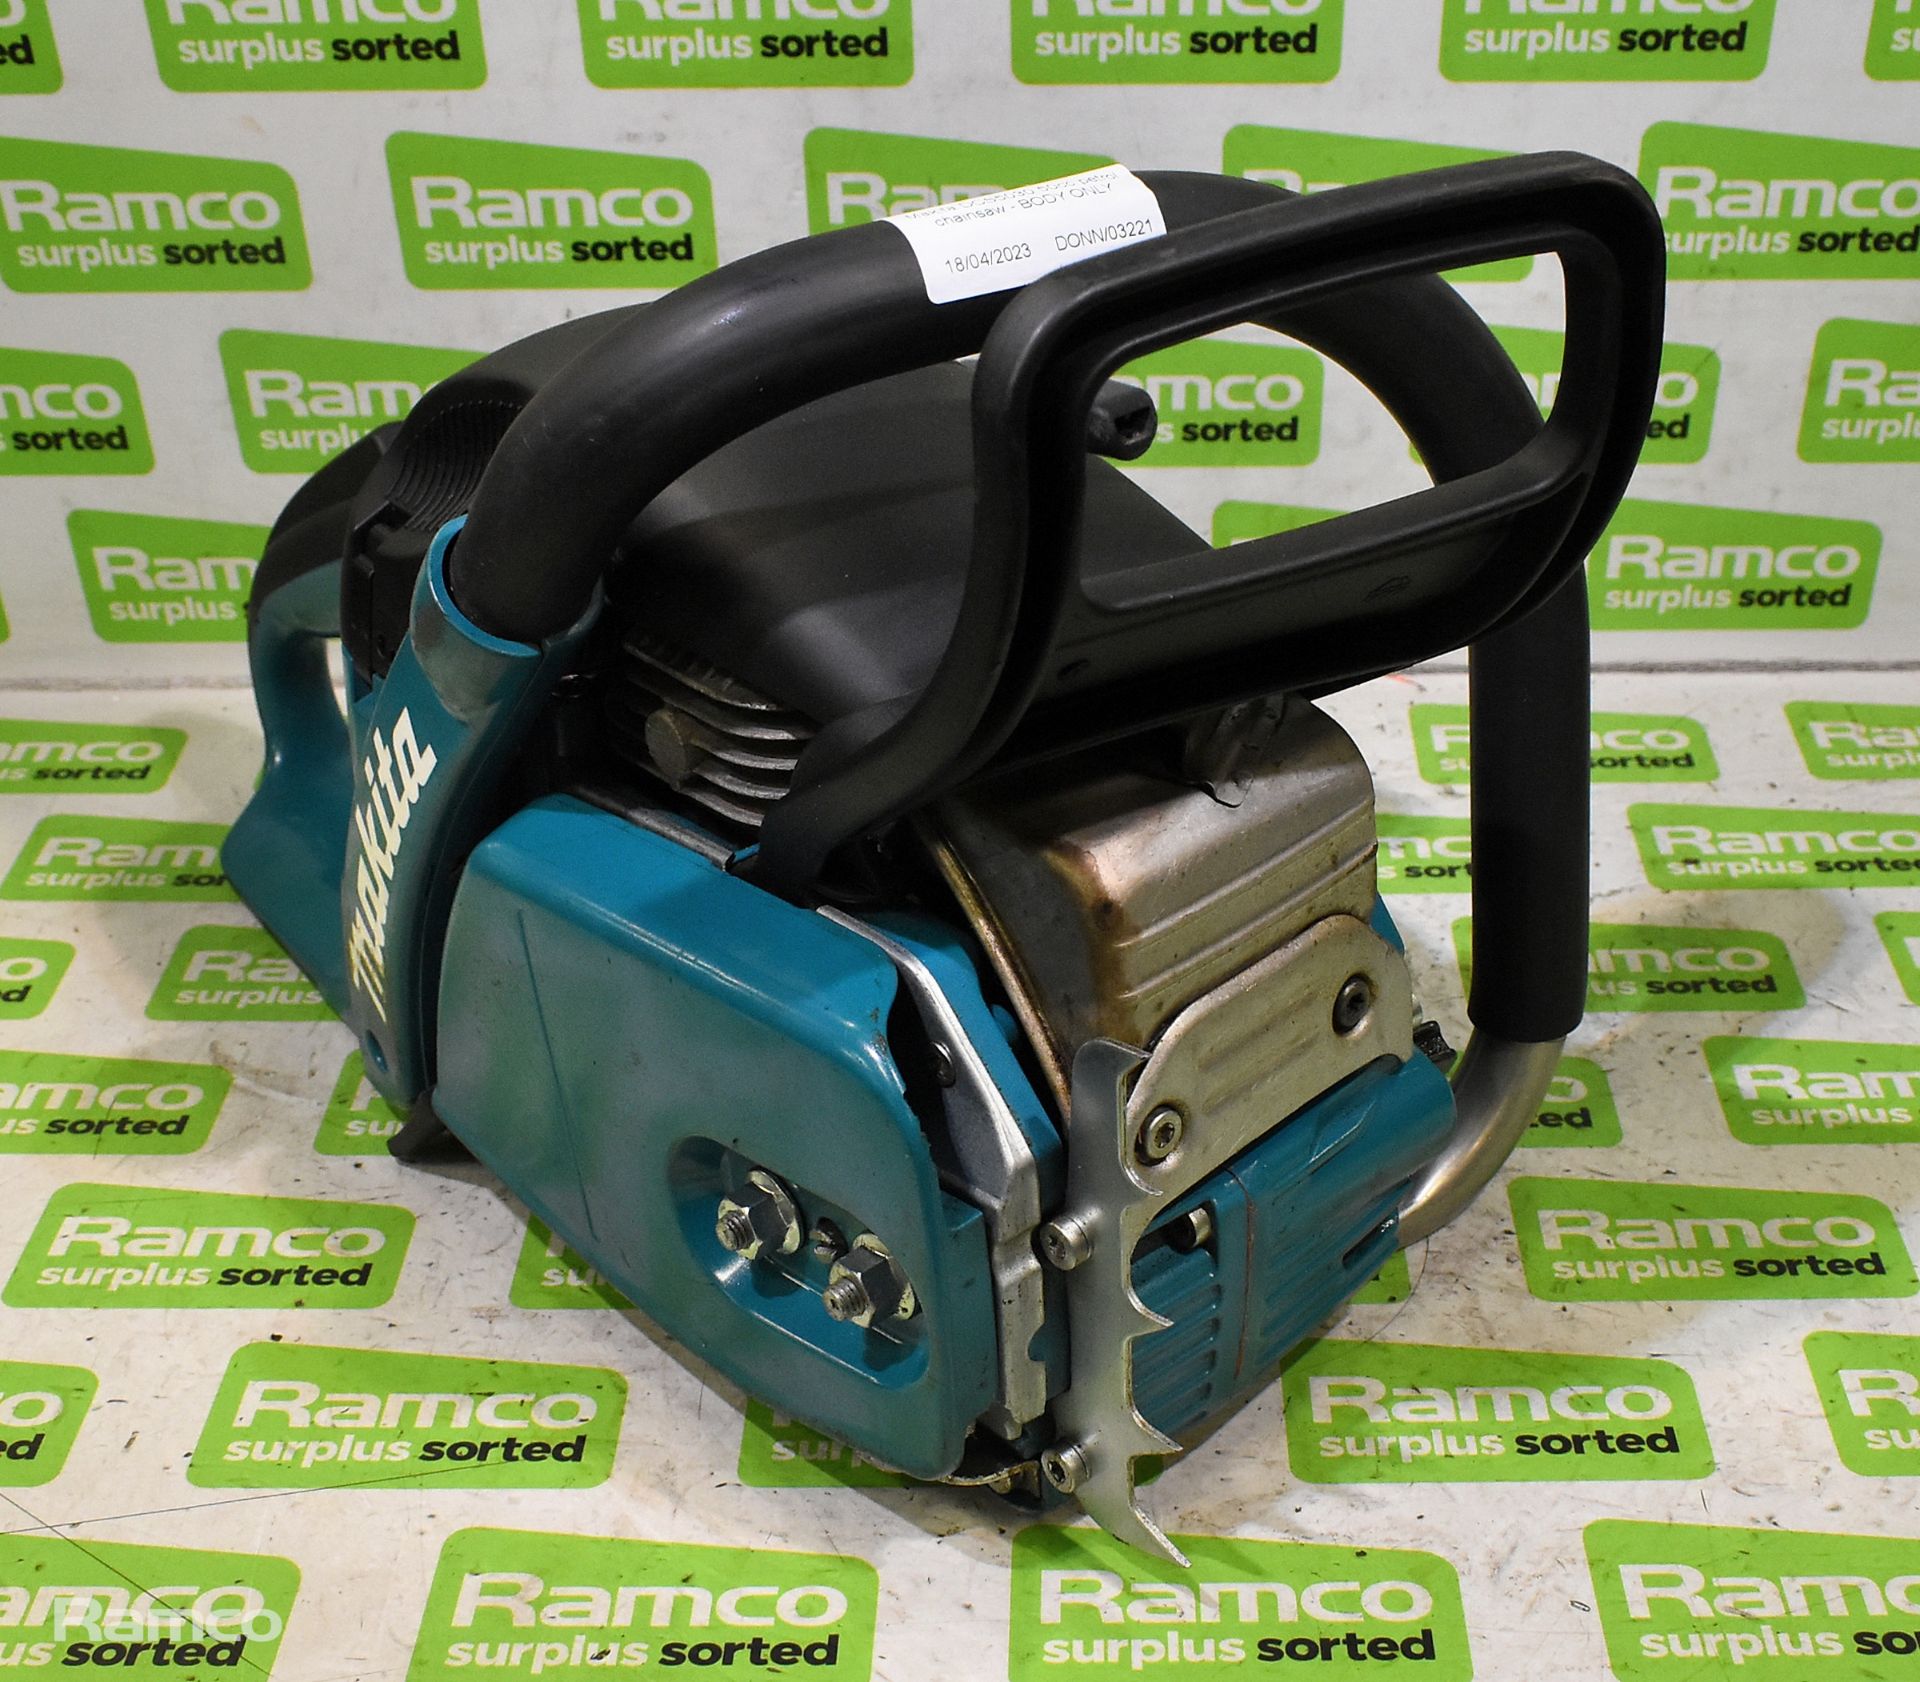 3x Makita DCS5030 50cc petrol chainsaw - BODIES ONLY - AS SPARES AND REPAIRS, 1x Makita EA5000P - Image 19 of 22